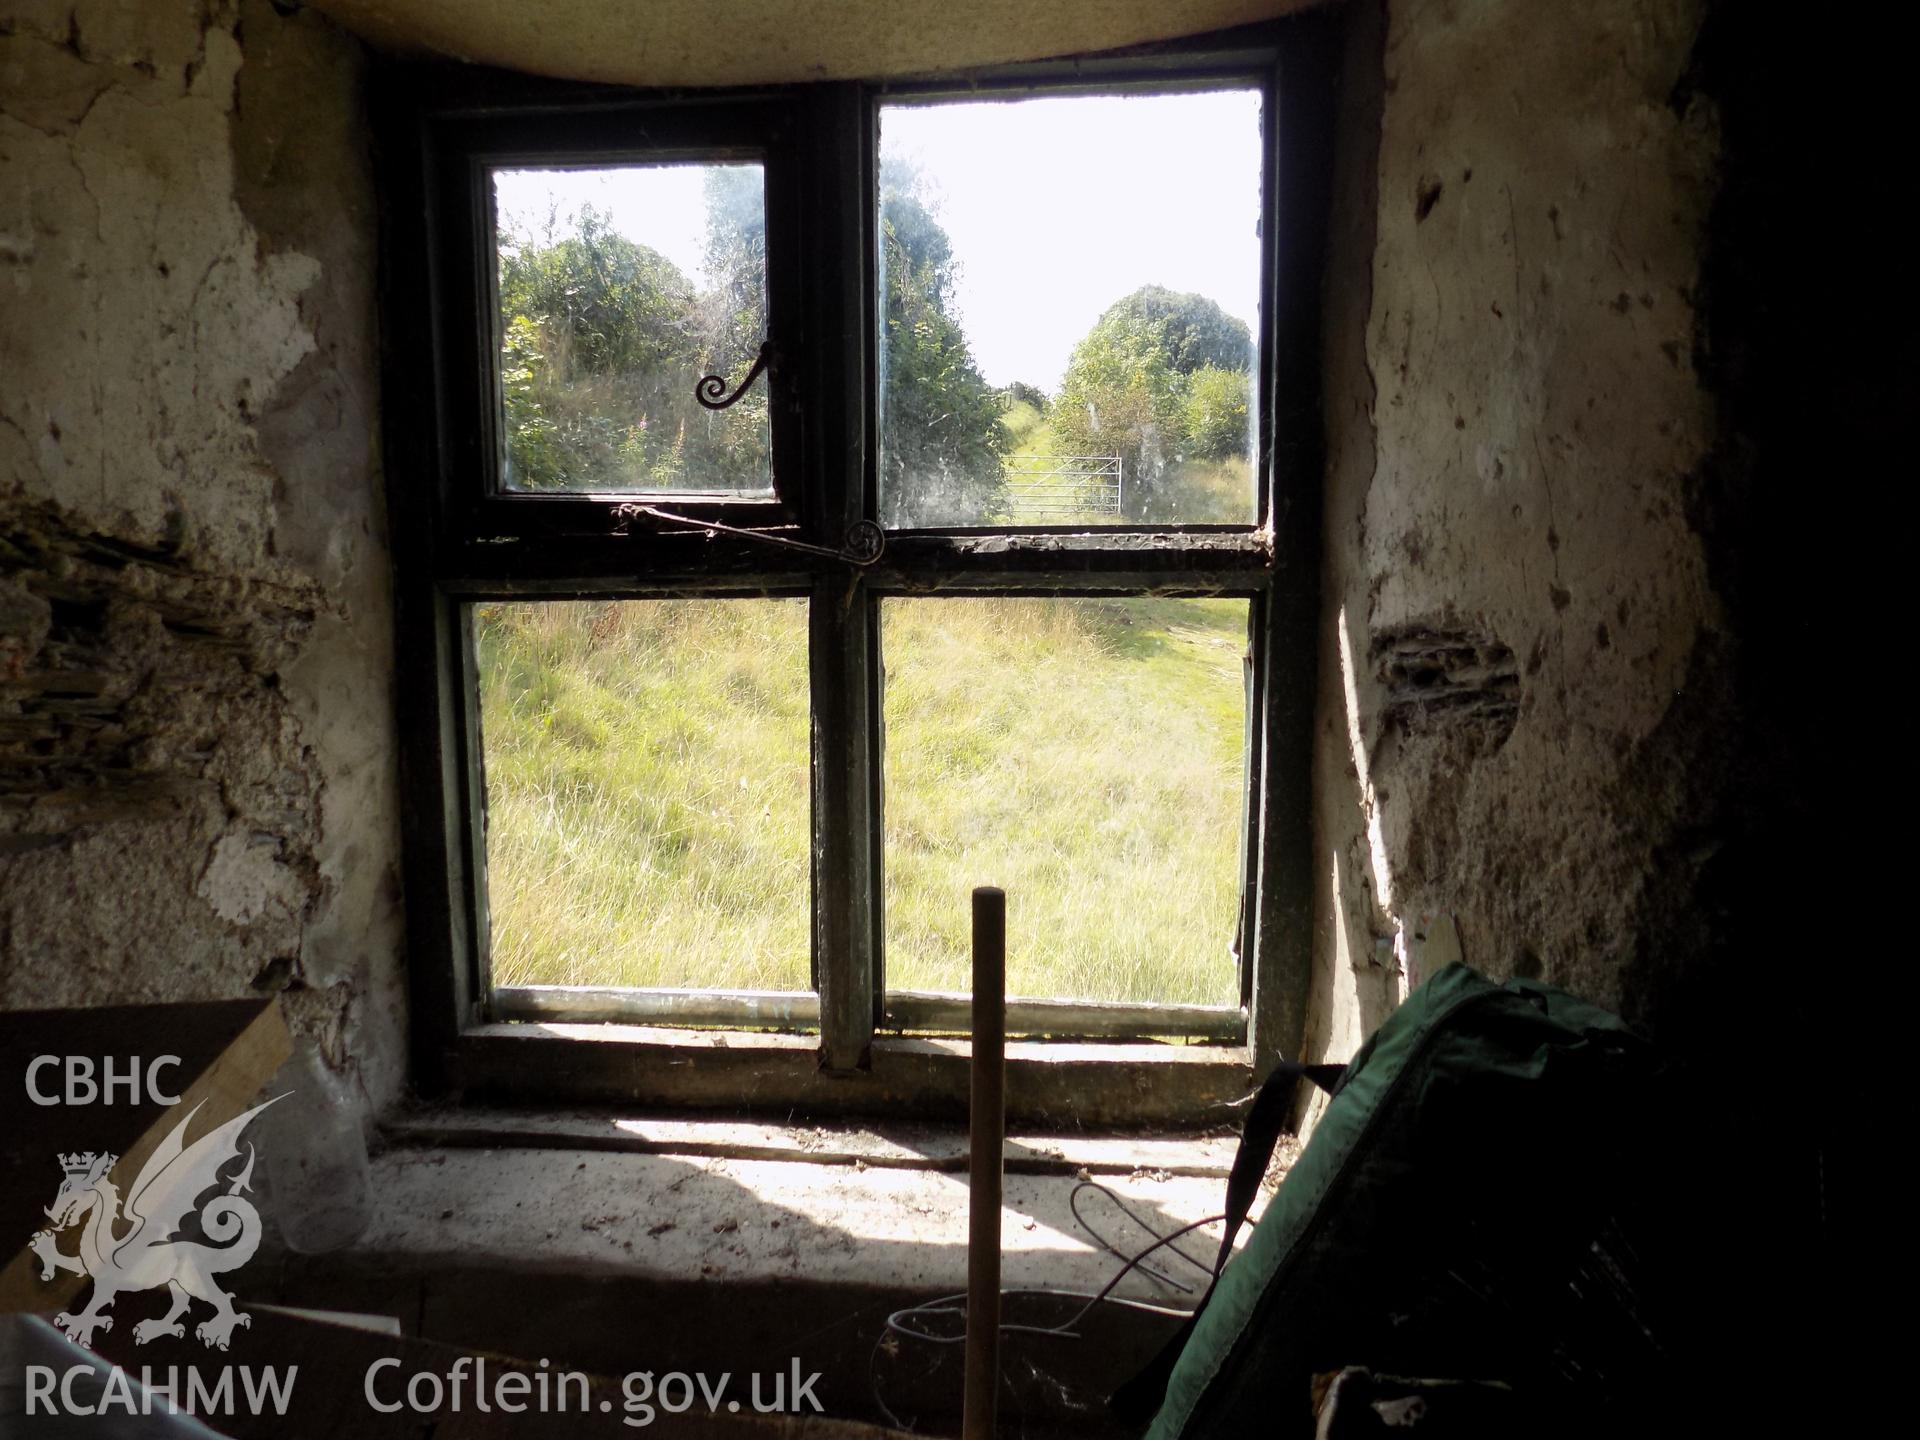 Digital colour photograph showing interior view of window in building attached to Tywyll Nodwydd house, Pennal, dated 2019. Photographed by Mr Gary Coulsby to meet a condition attached to a planning application.